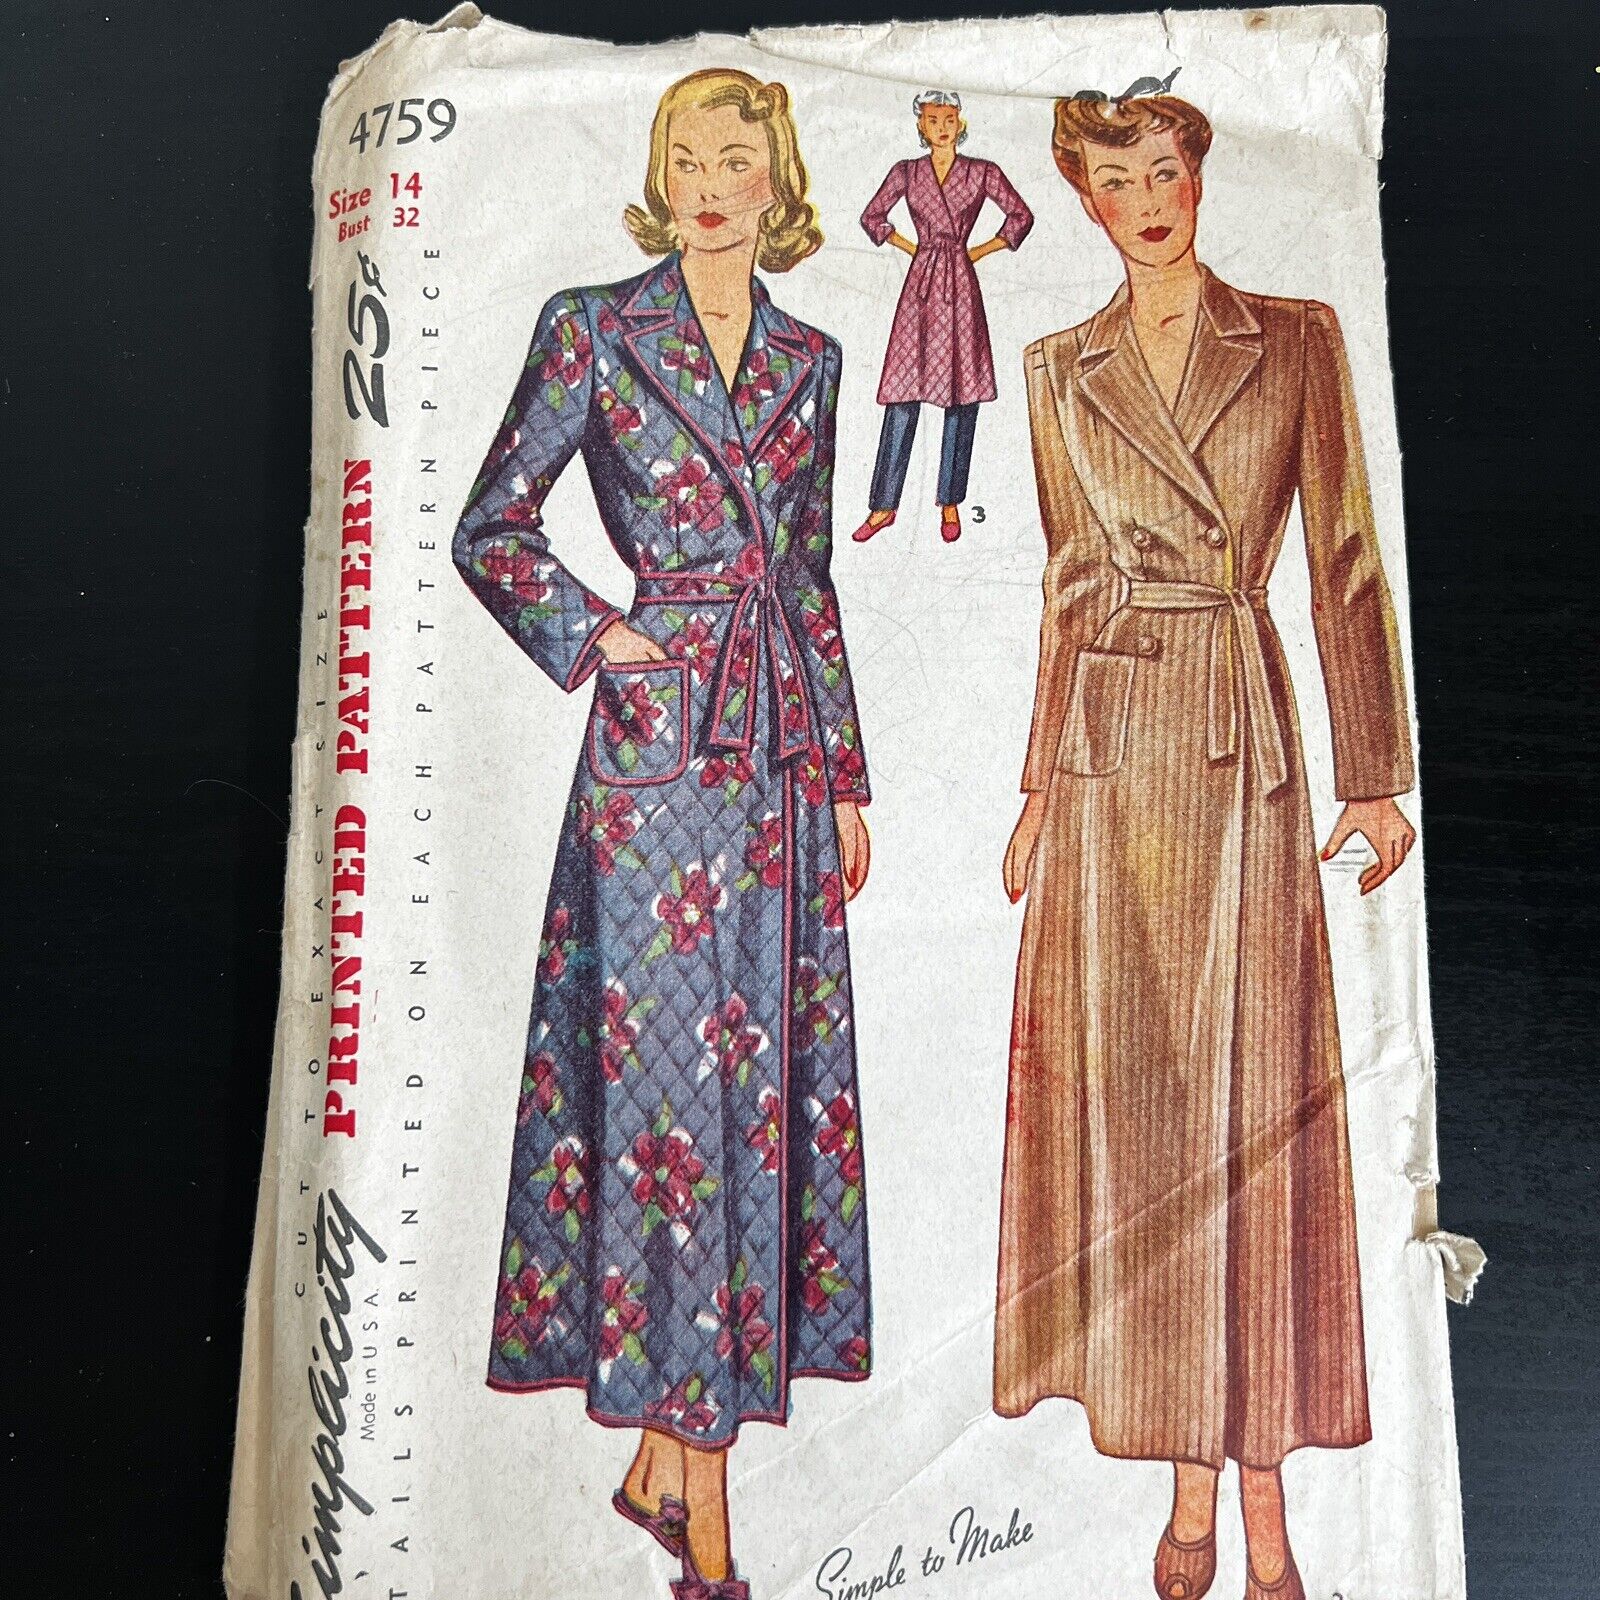 Vintage 1940s Simplicity 4759 Belted Robe + Housecoat Sewing Pattern 14 XS CUT